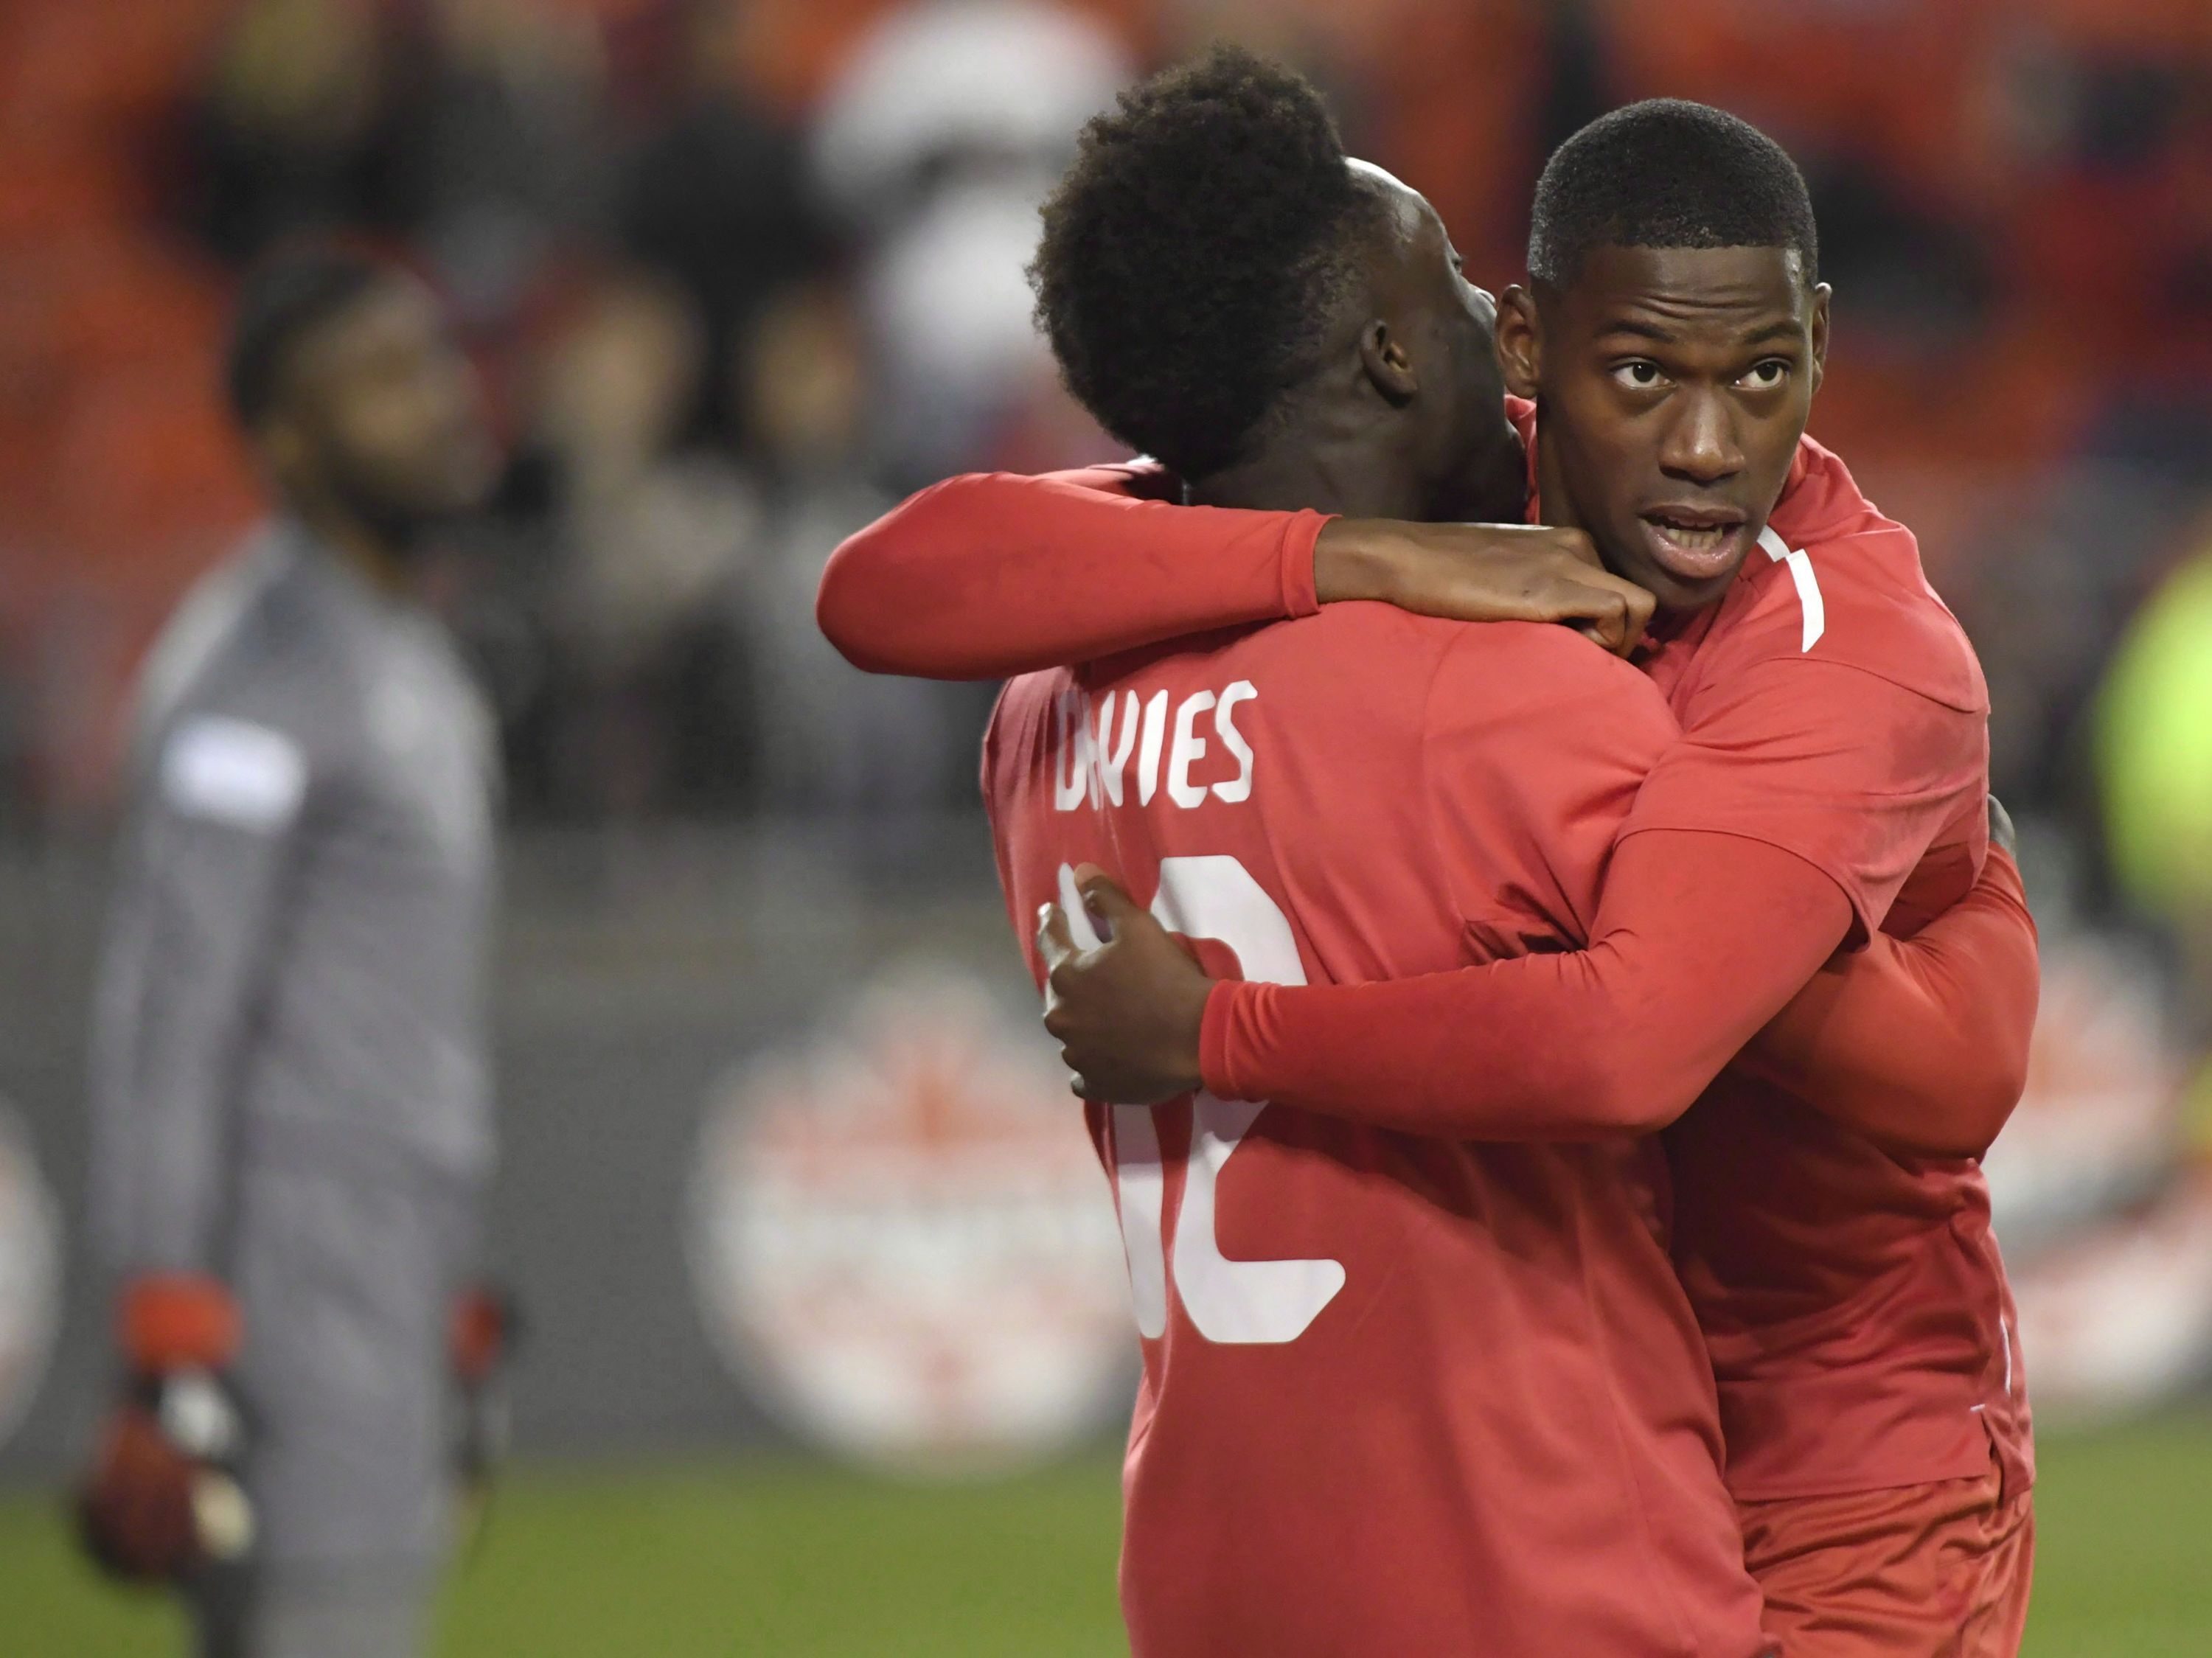 Canada calls up four Toronto FC players Concacaf Nations League Qualifying  in Toronto